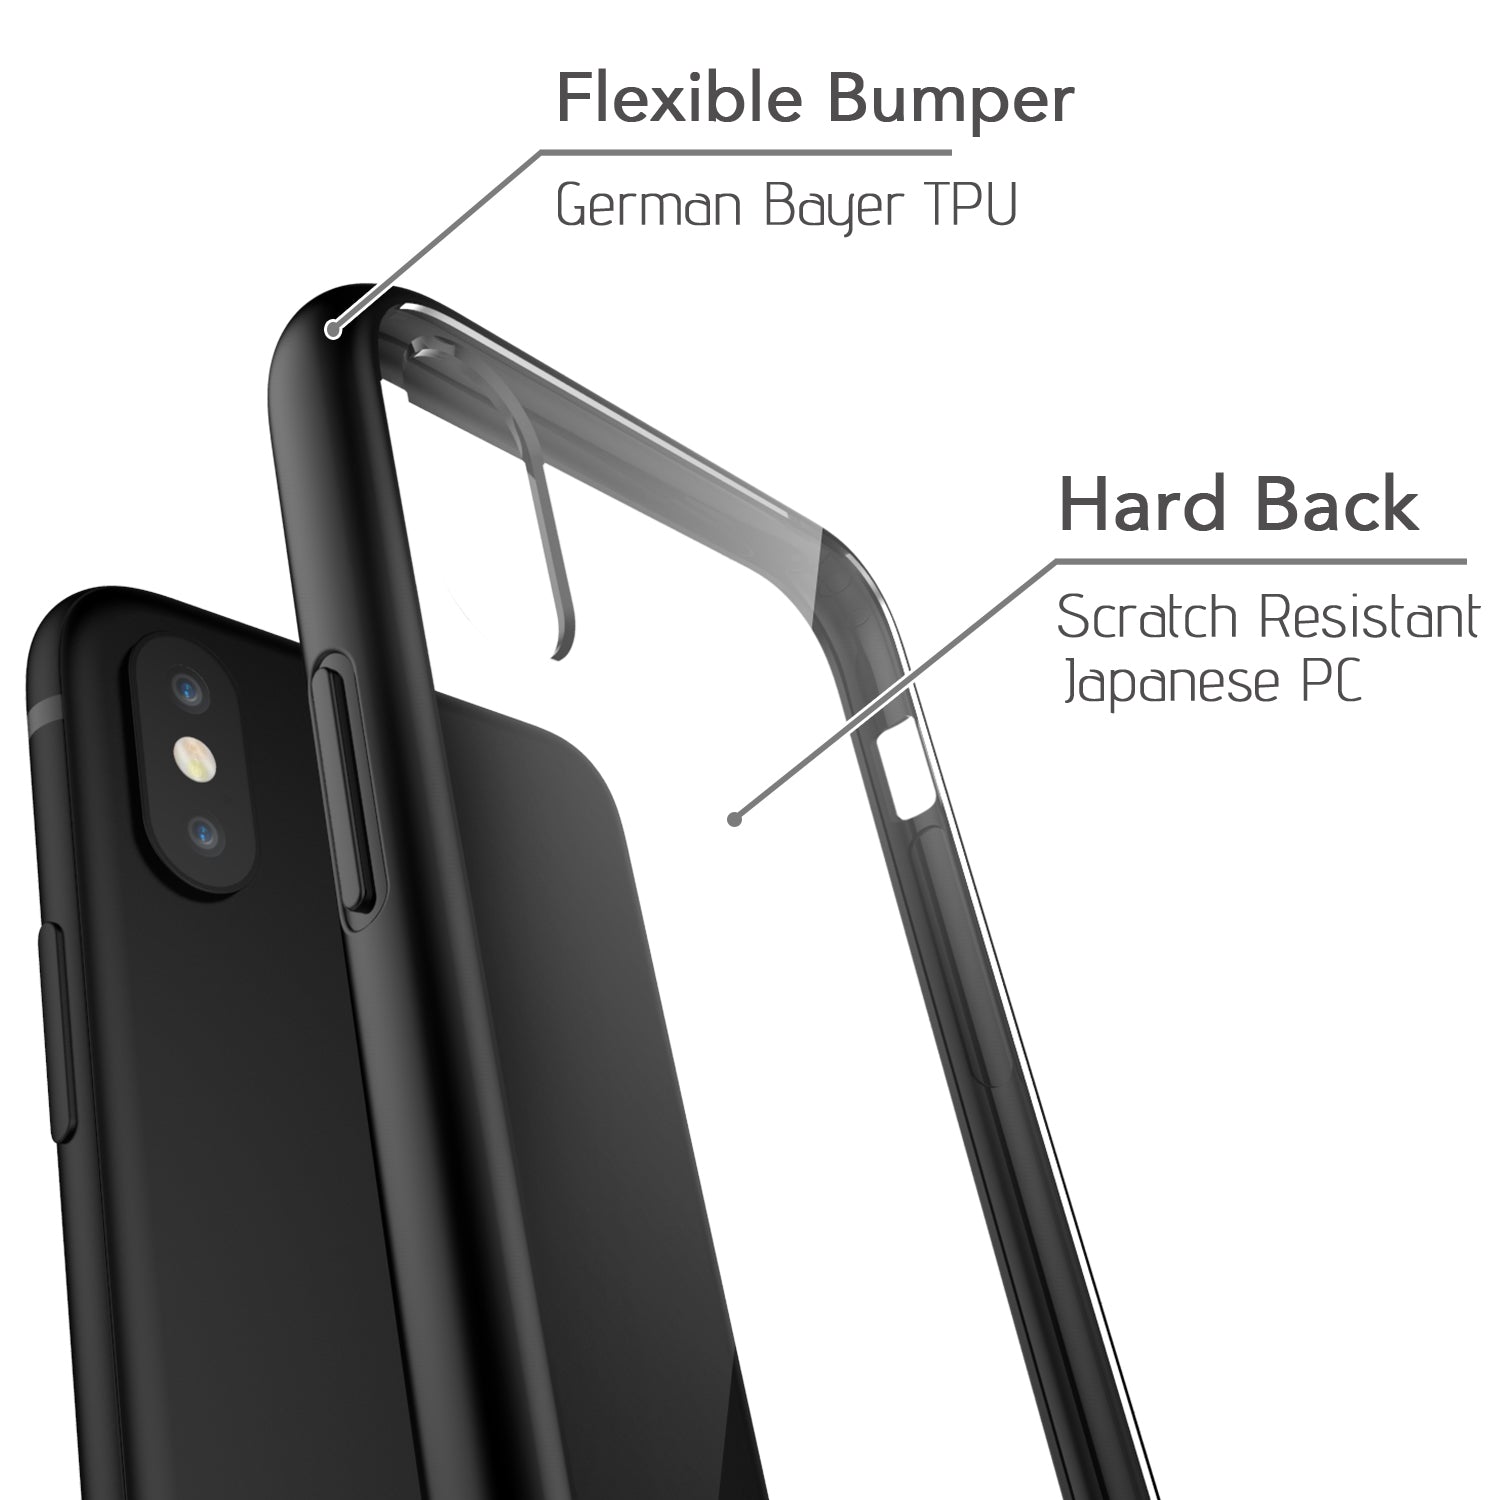 Luvvitt Clear View Hybrid Case for iPhone XS / X - Black